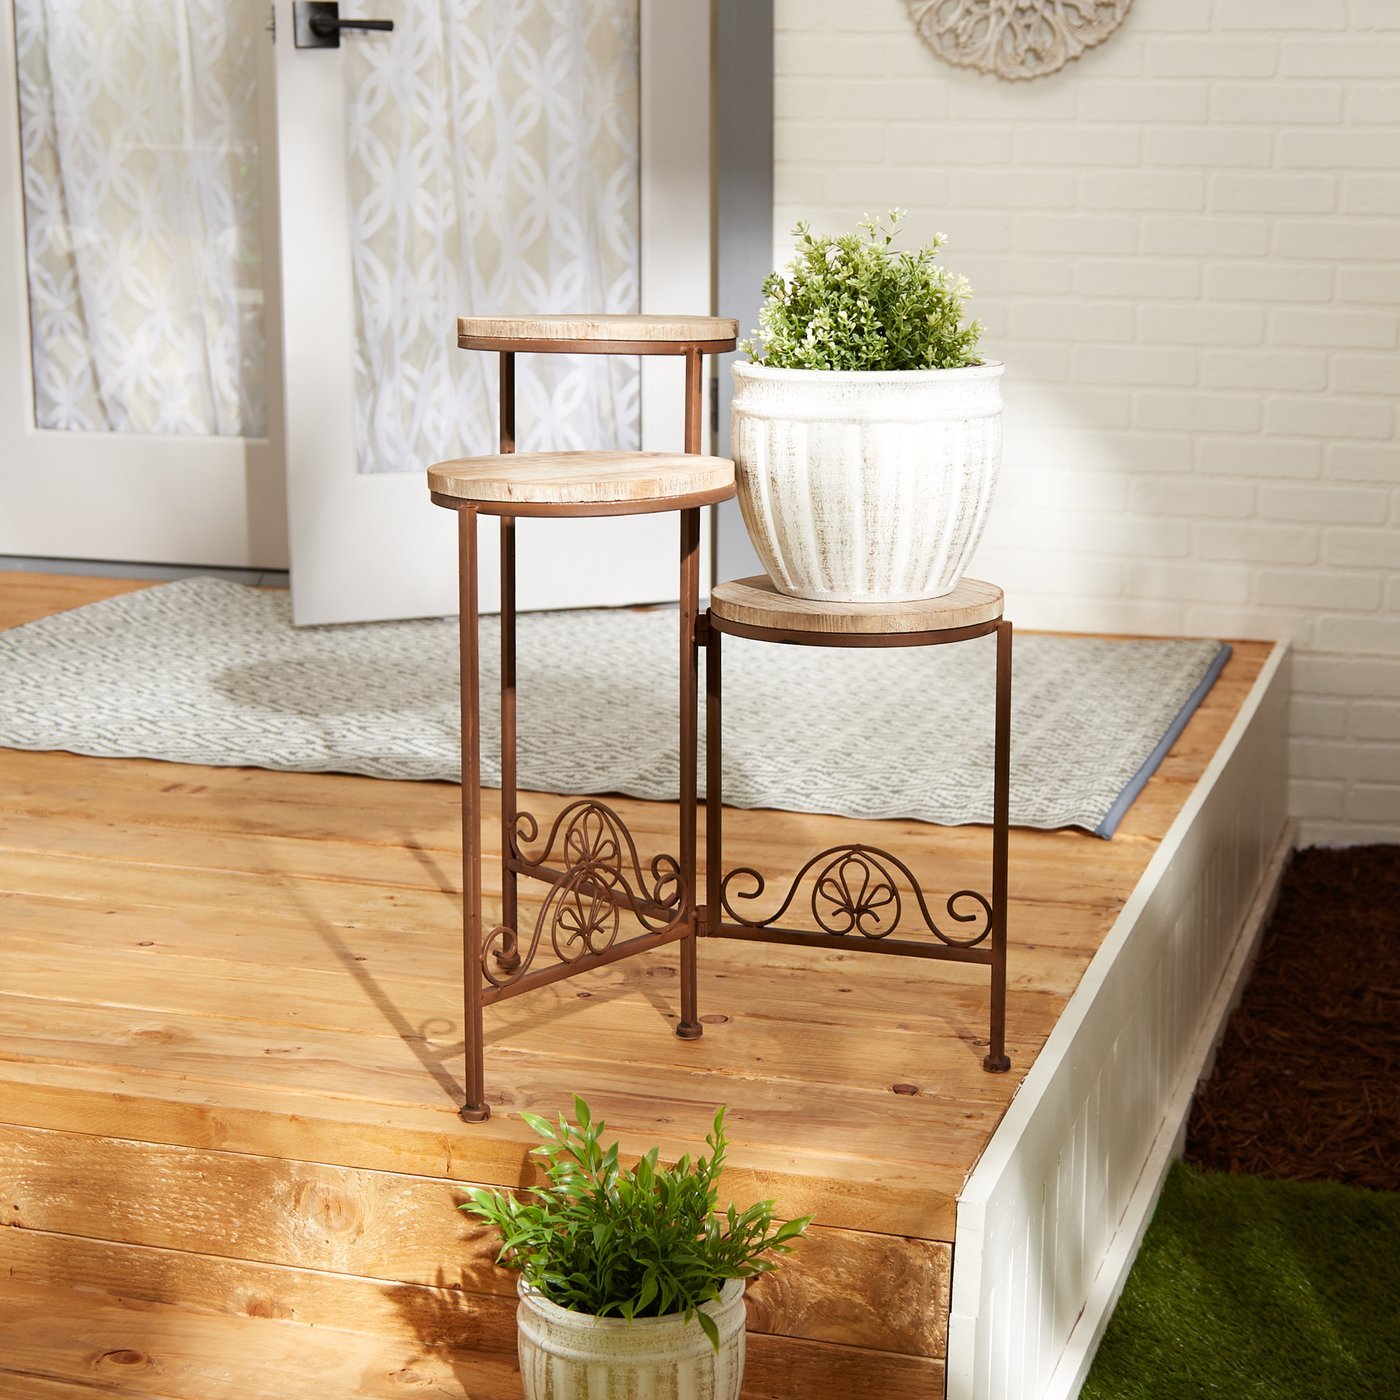 Weathered Wood Rustic Finish Triple Plant Stand Indoor-Outdoor